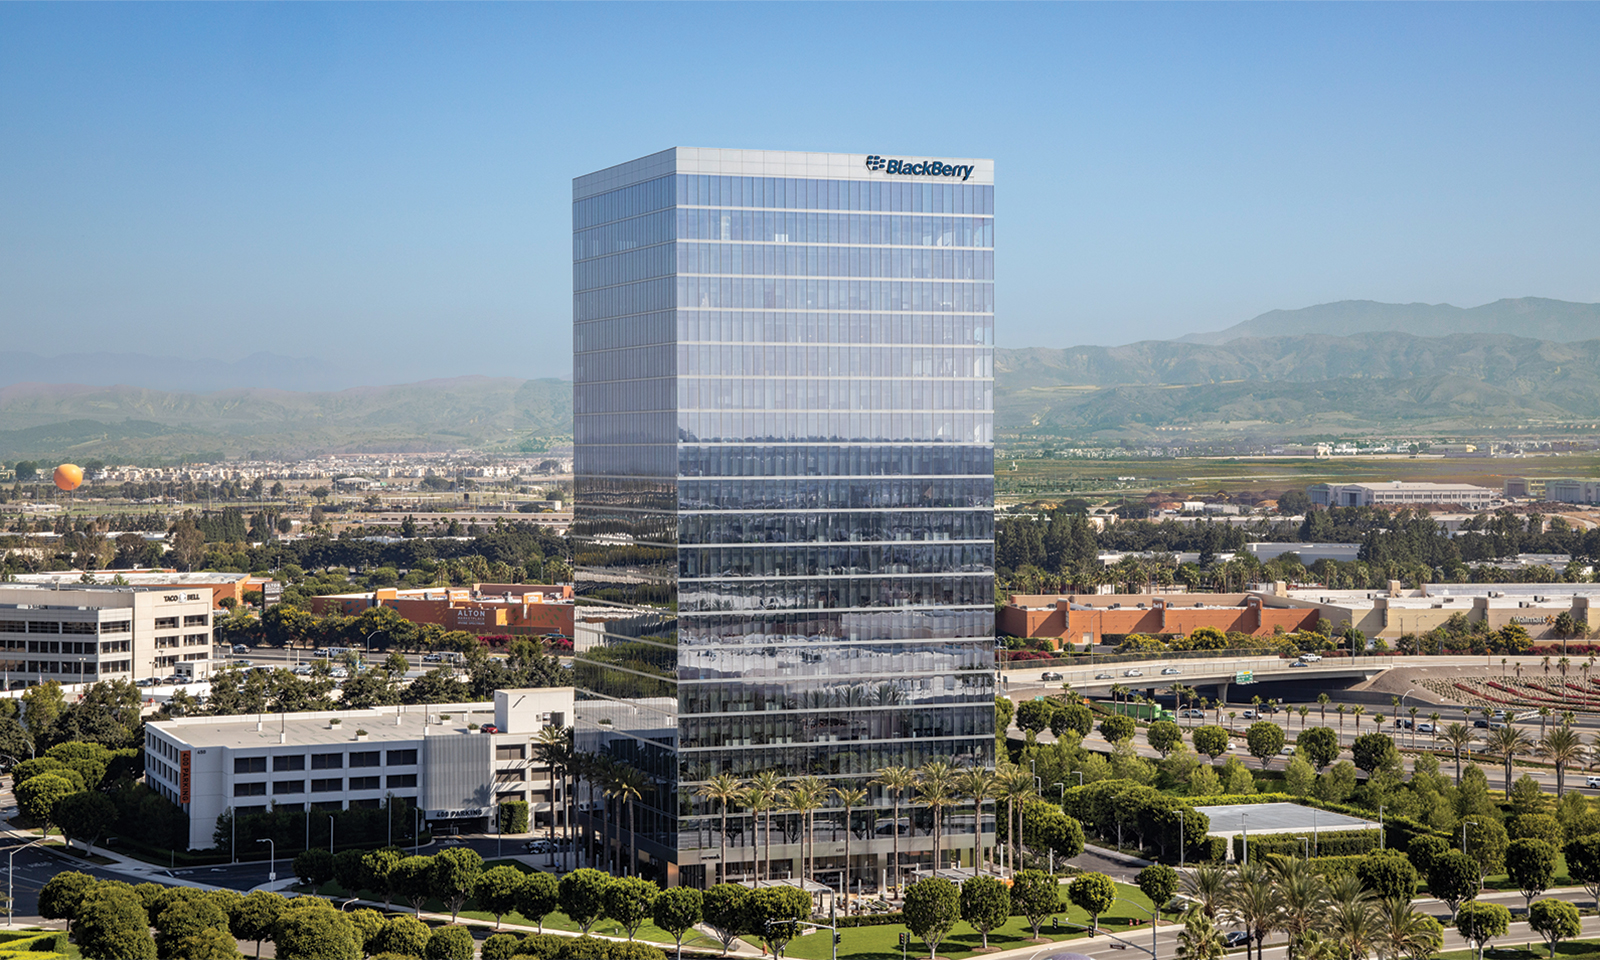 Irvine: California’s best city to start a business